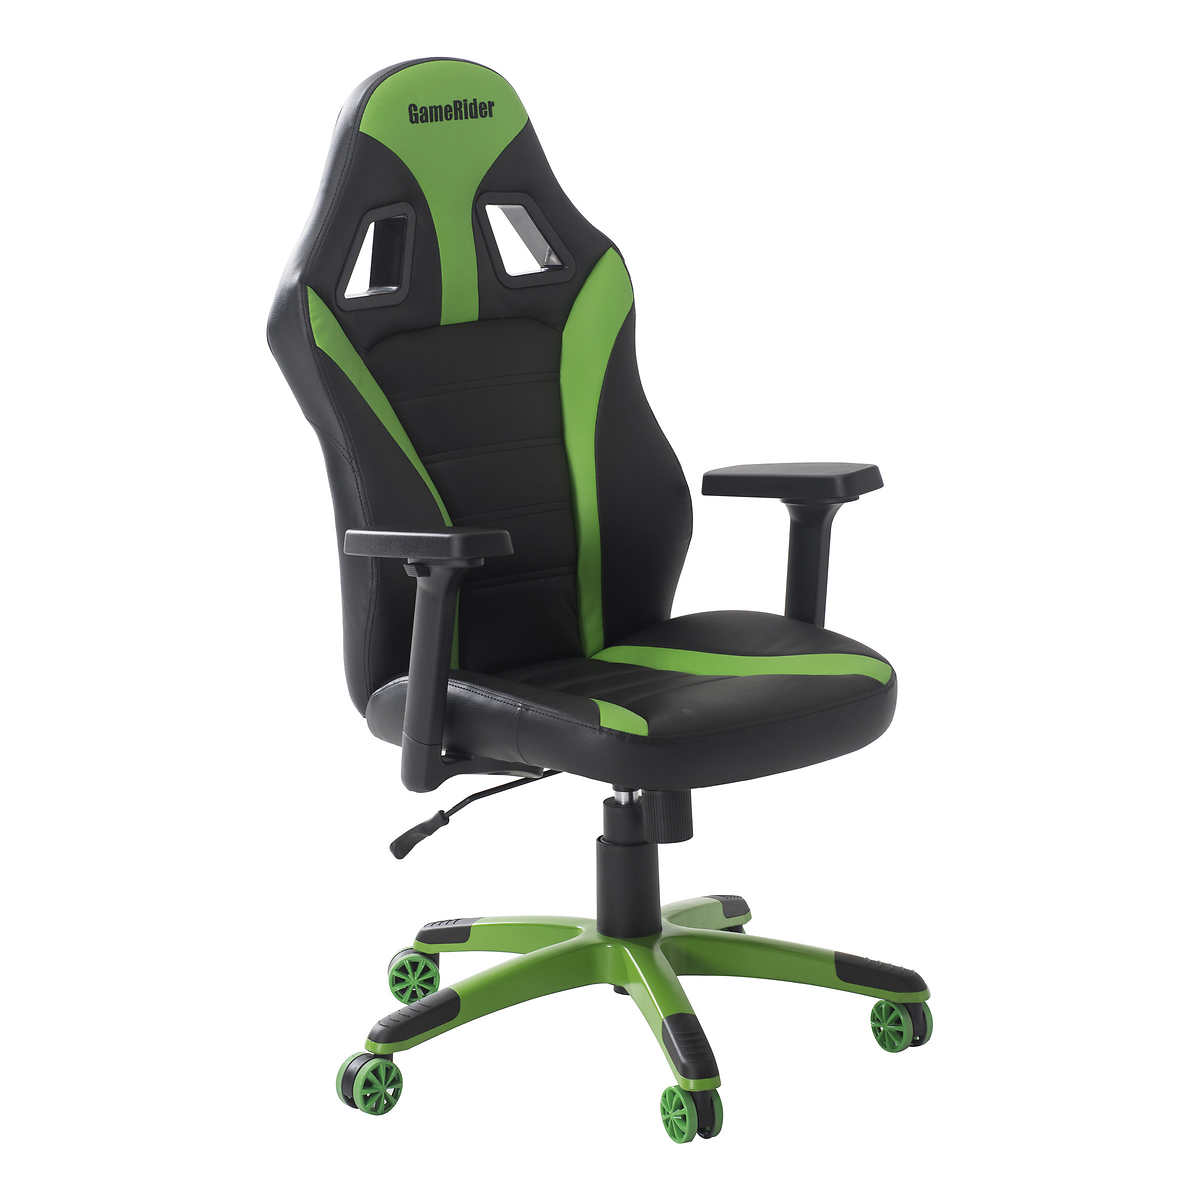 Gamerider X Qualifier Racer Style Game Chair Green Costco